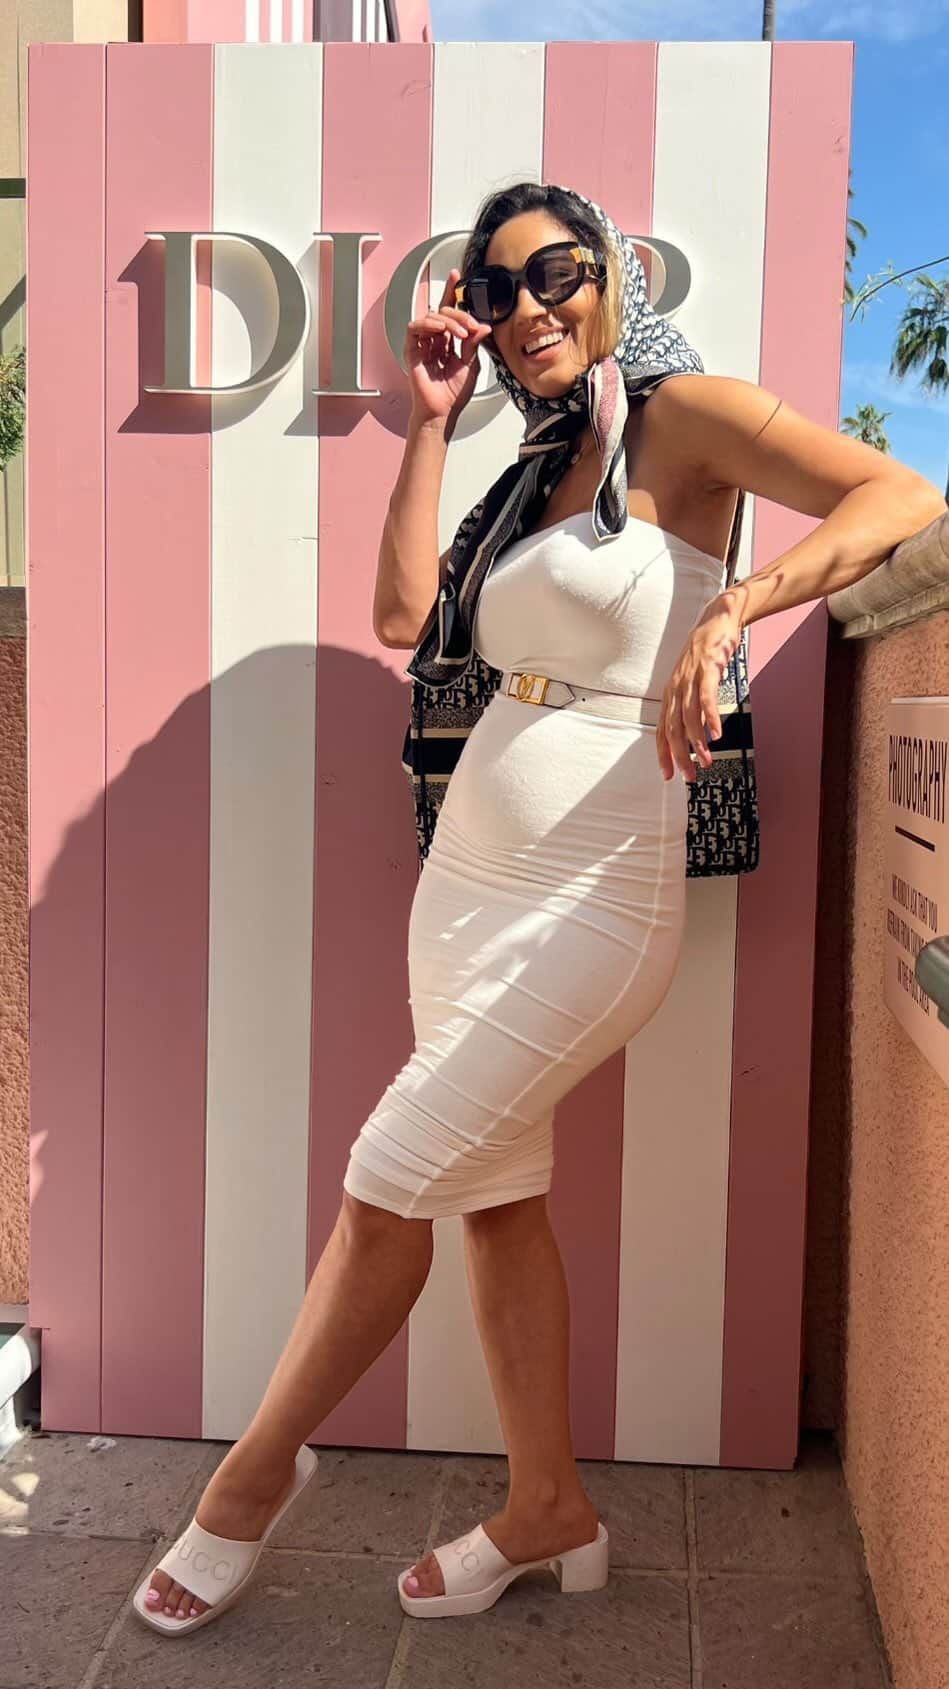 Sarah Mundoのインスタグラム：「Enjoying the #DiorRiviera experience pop up at The Beverly Hills Hotel offering exclusive pink and grey pieces dedicated to the hotels color scape. Love this aesthetic experience.  #beverlyhillshotel #dior23」